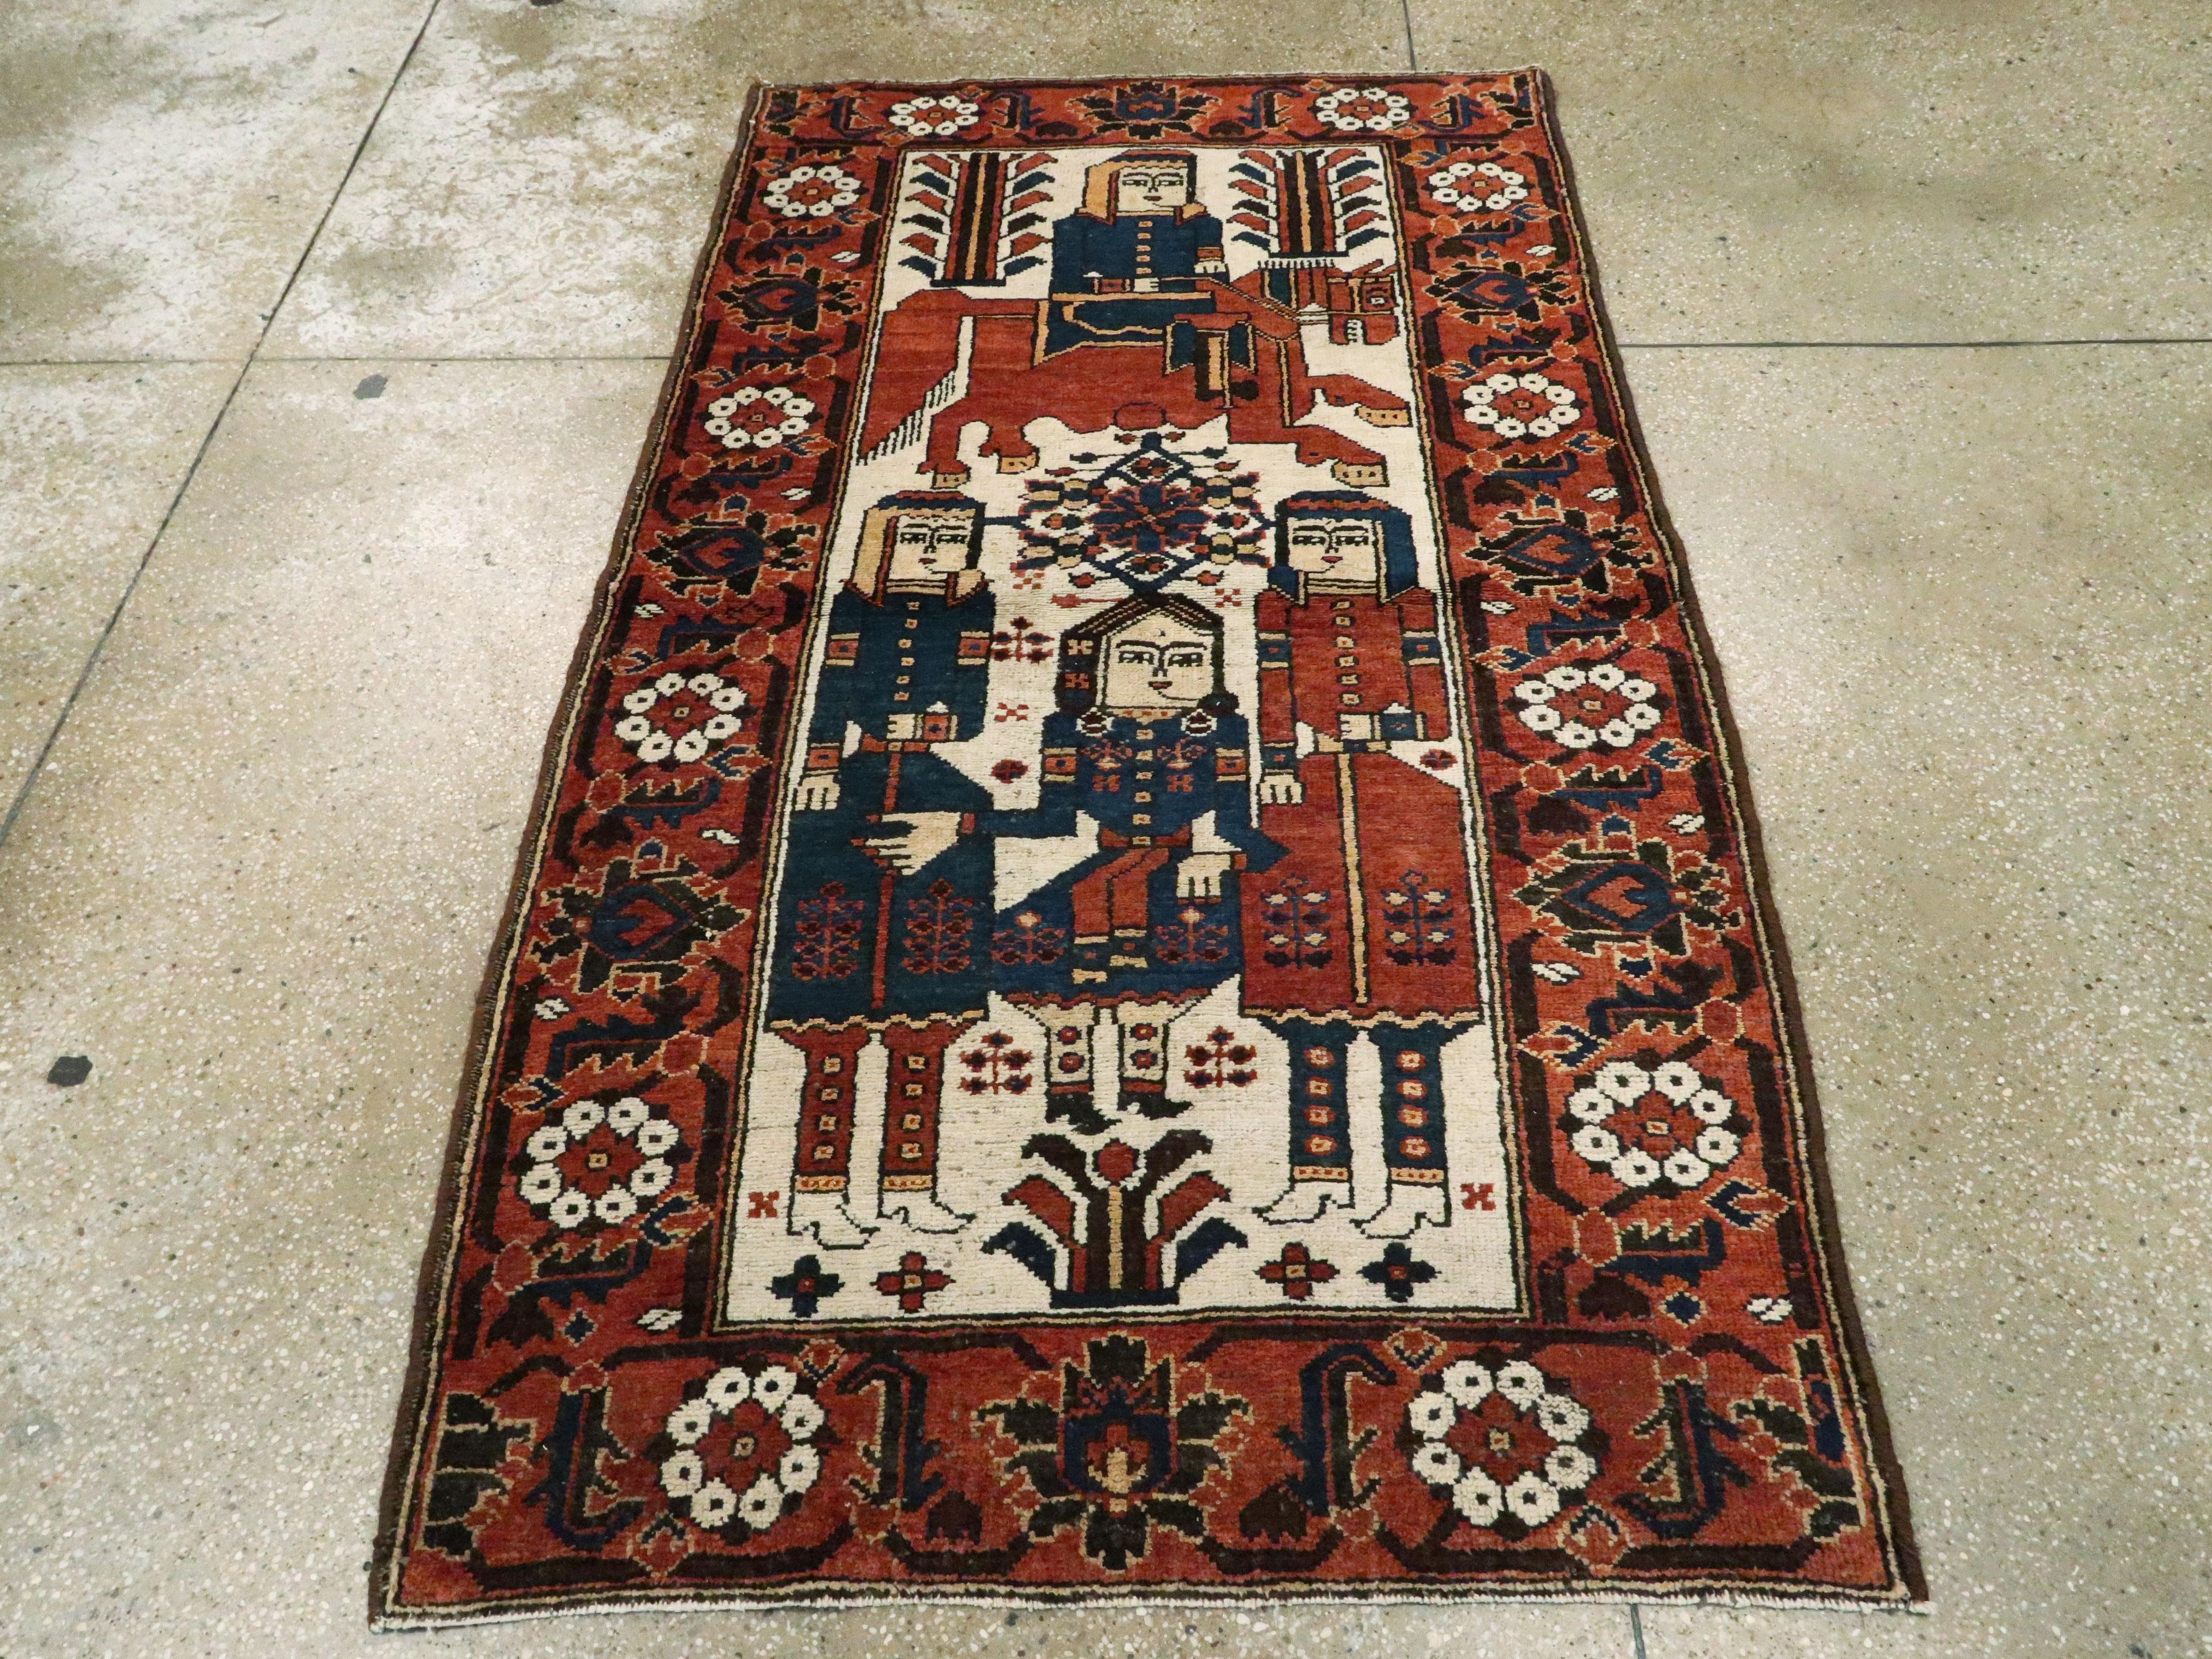 A vintage Persian Bakhtiari pictorial rug from the mid-20th century.

Measures: 3' 10